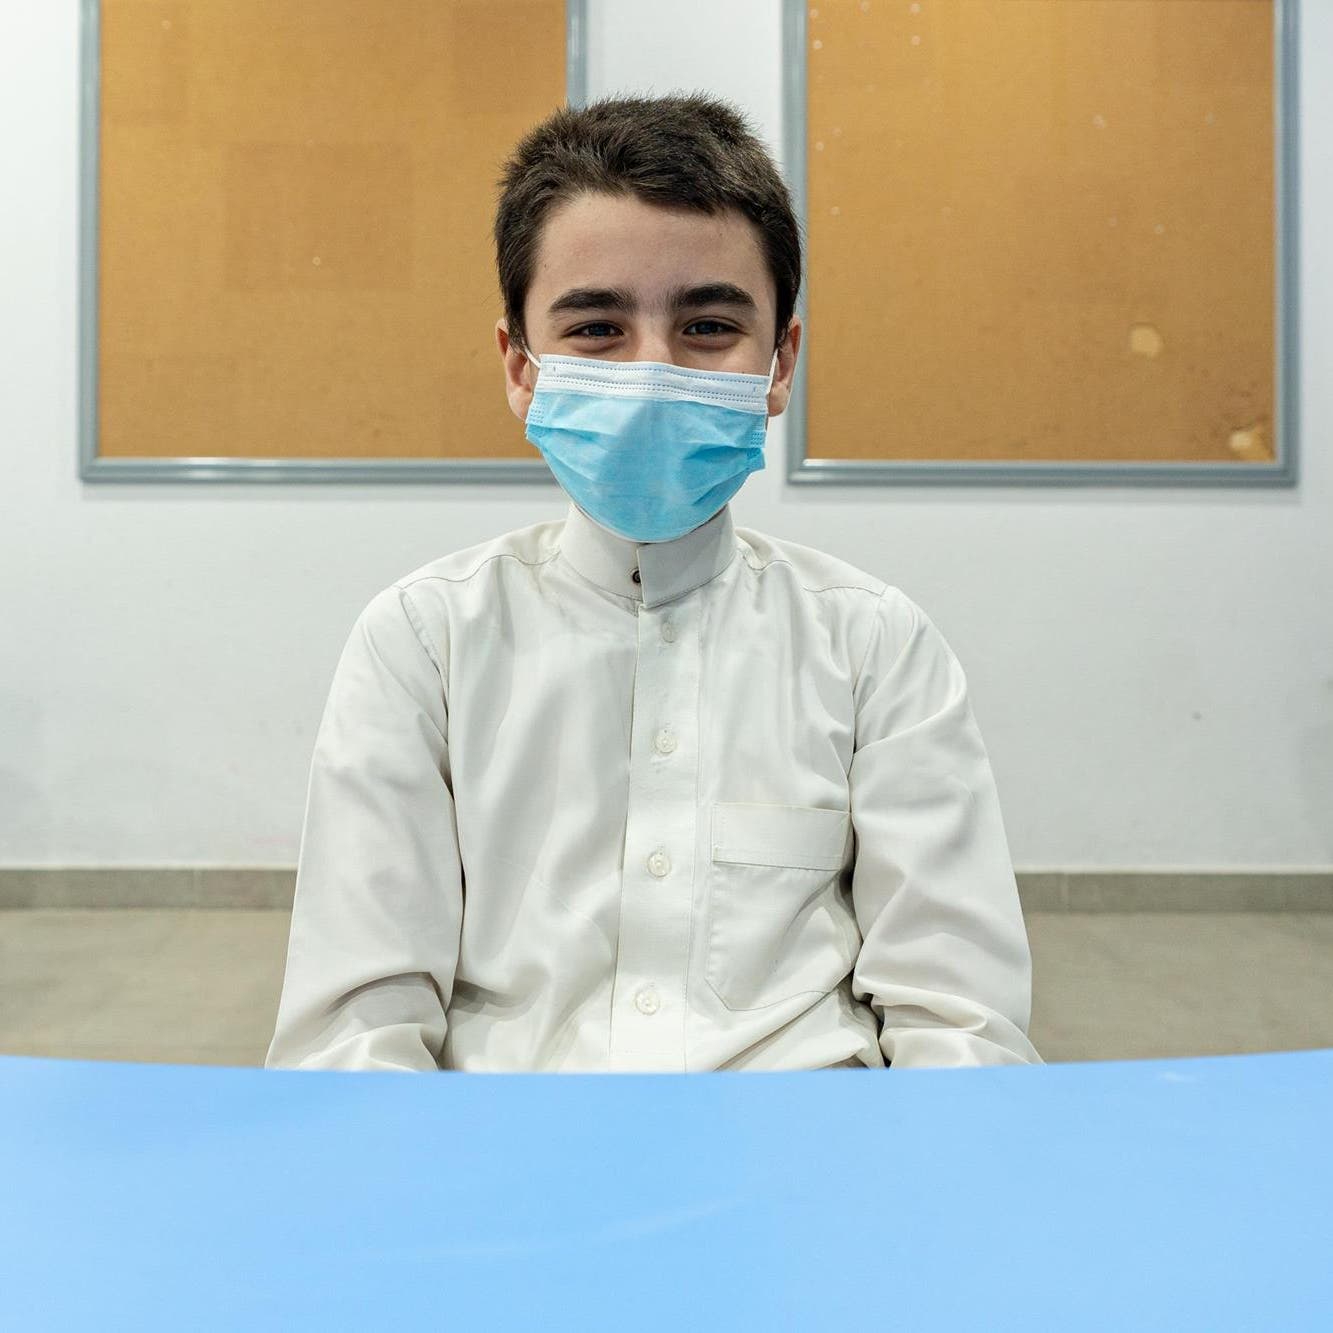 Saudi Arabia will not mark unvaccinated students absent in first two weeks of school 